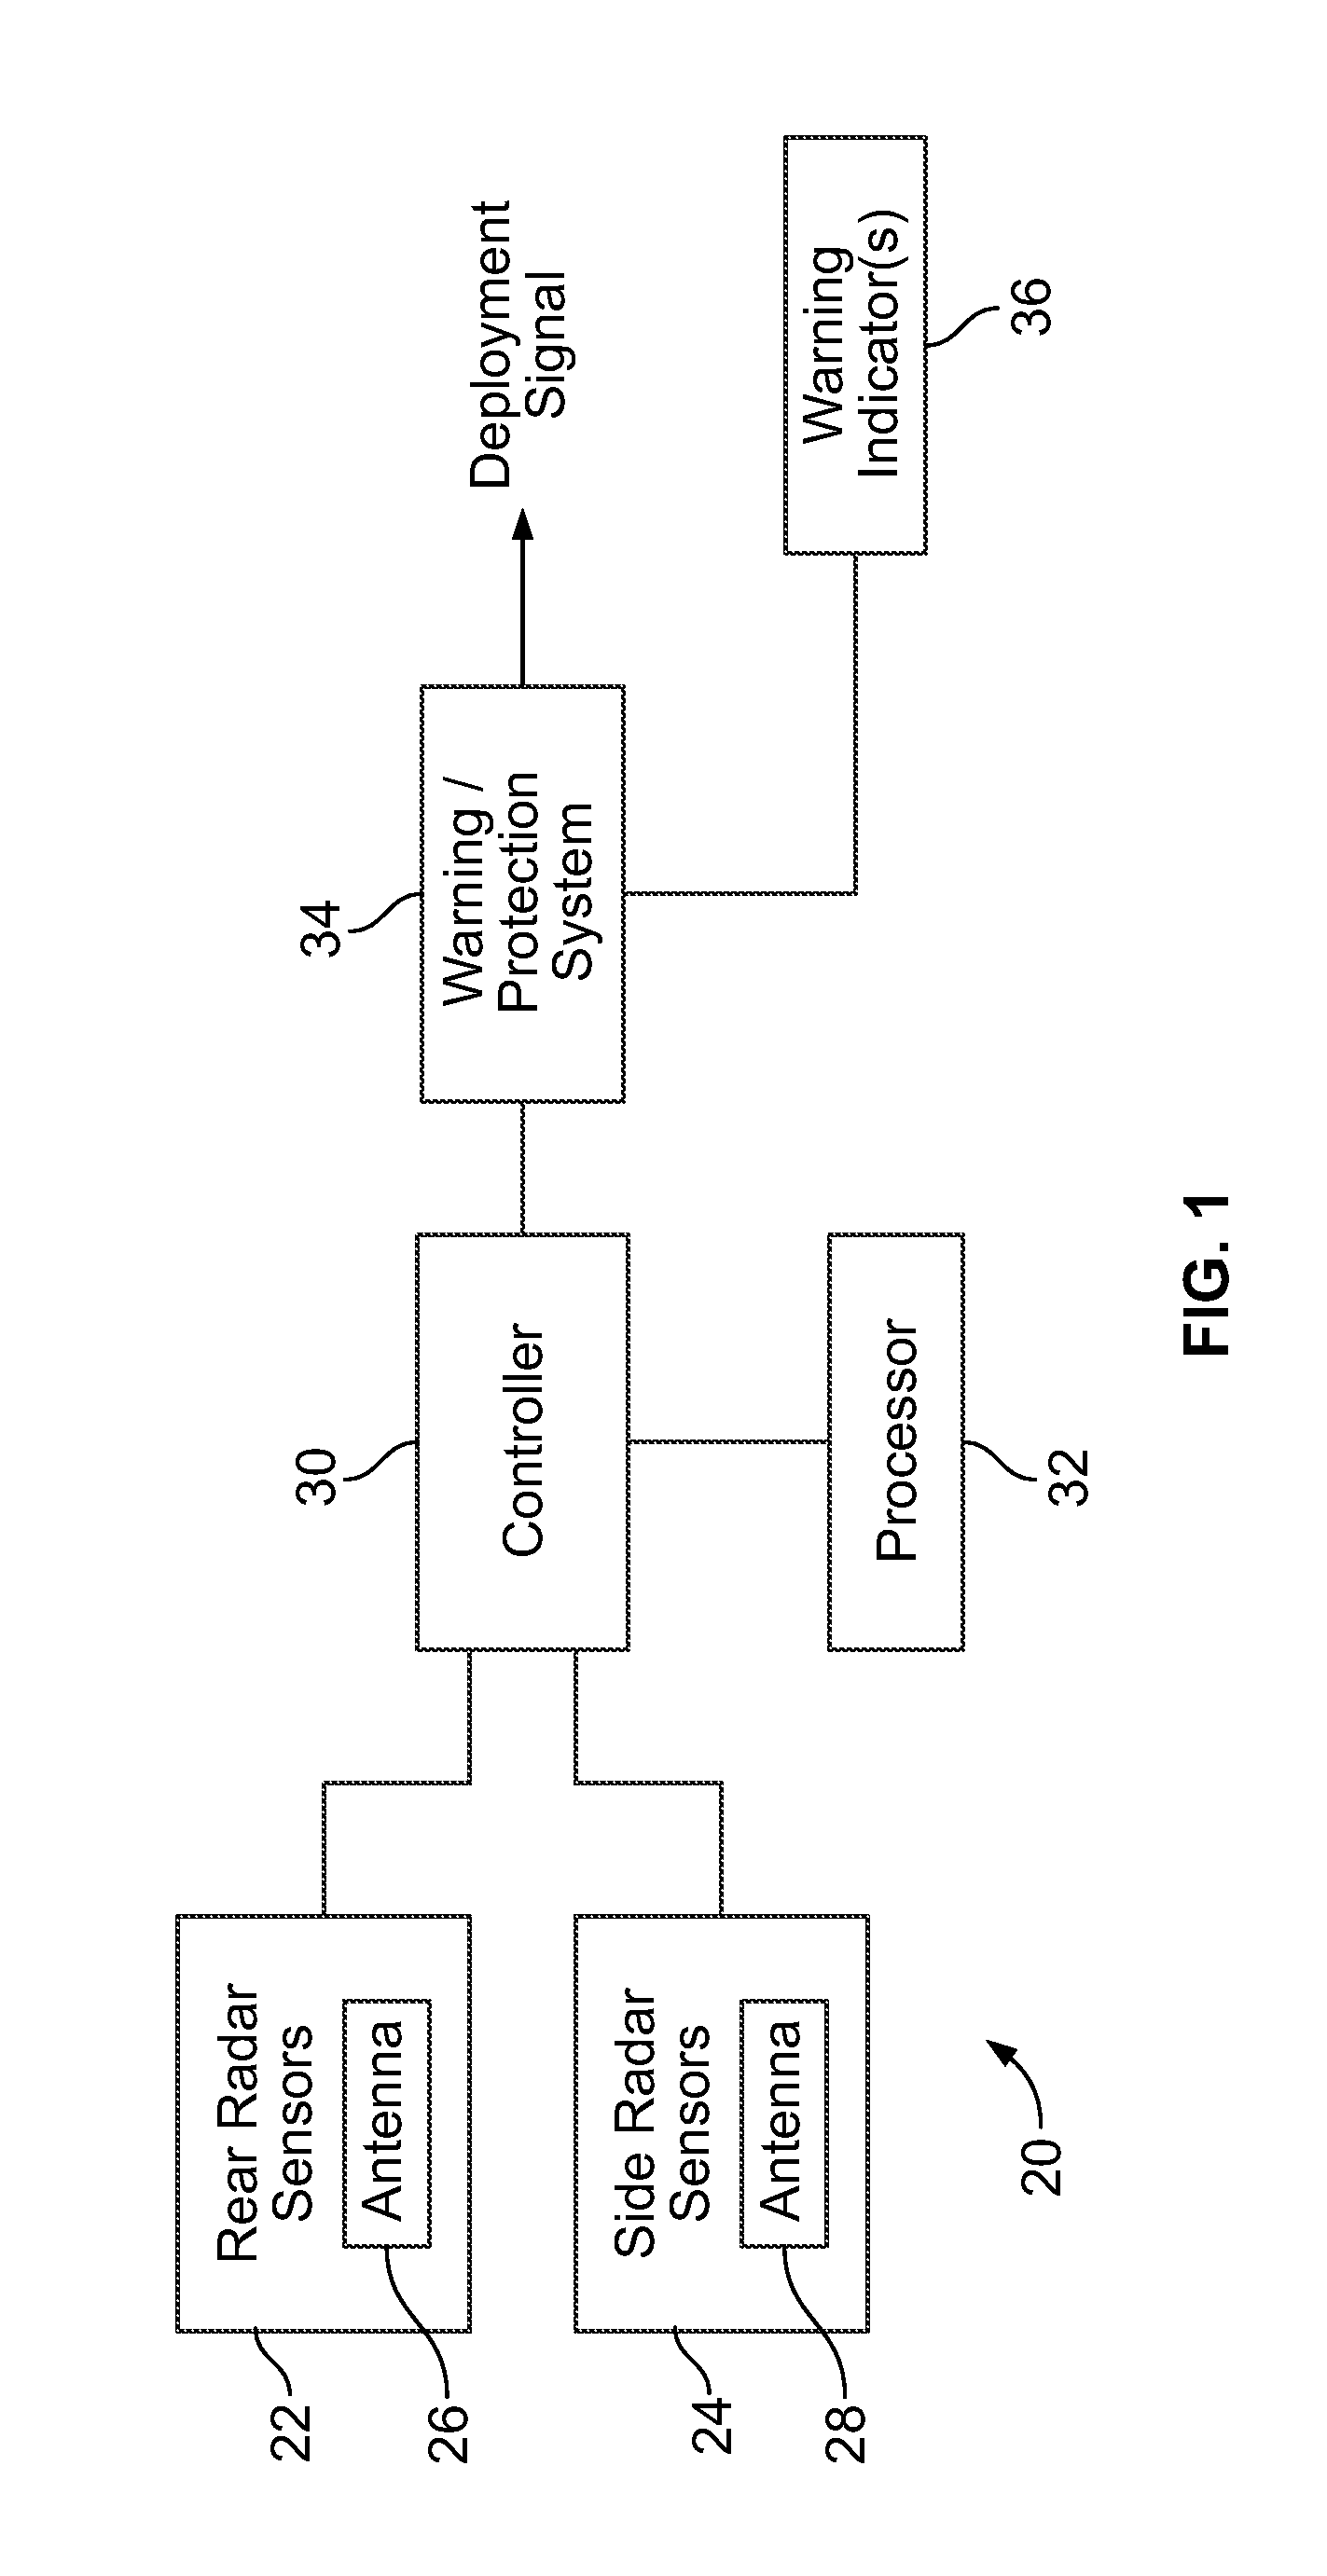 Vehicle radar system and method for detecting objects